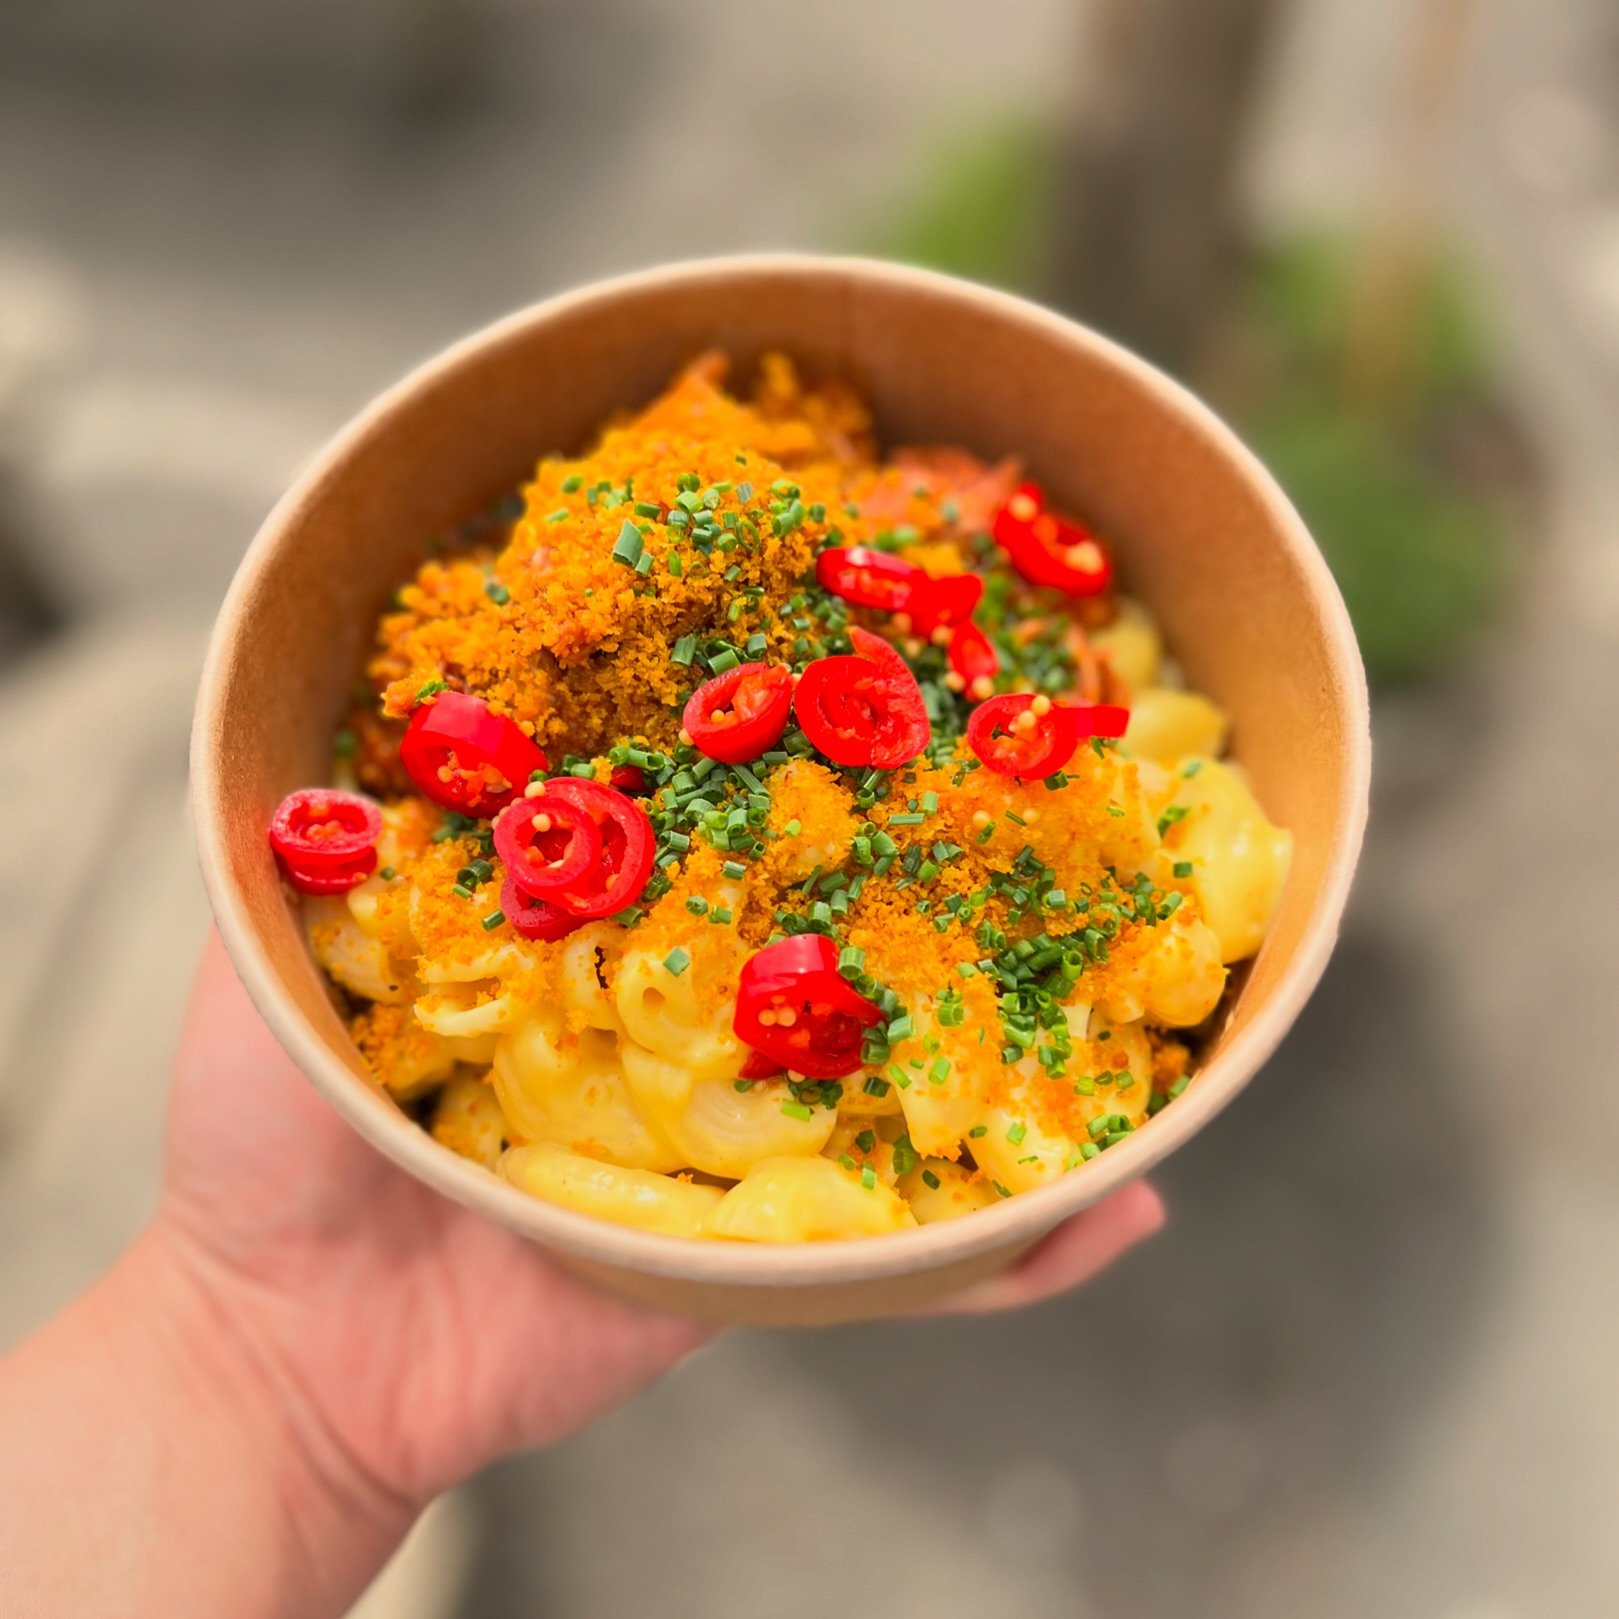 💥 FRIDAY LUNCH SPECIAL : 17th : 💥 

Pork ragu, jalape&ntilde;o mac &amp; cheese, pangritata, pickled chilli &pound;10

⏰ 10am ONWARDS
⭕️ NO RESERVATIONS
⭕️ NO SLIDING INTO DM&rsquo;S
⭕️ FIRST COME FIRST SERVE